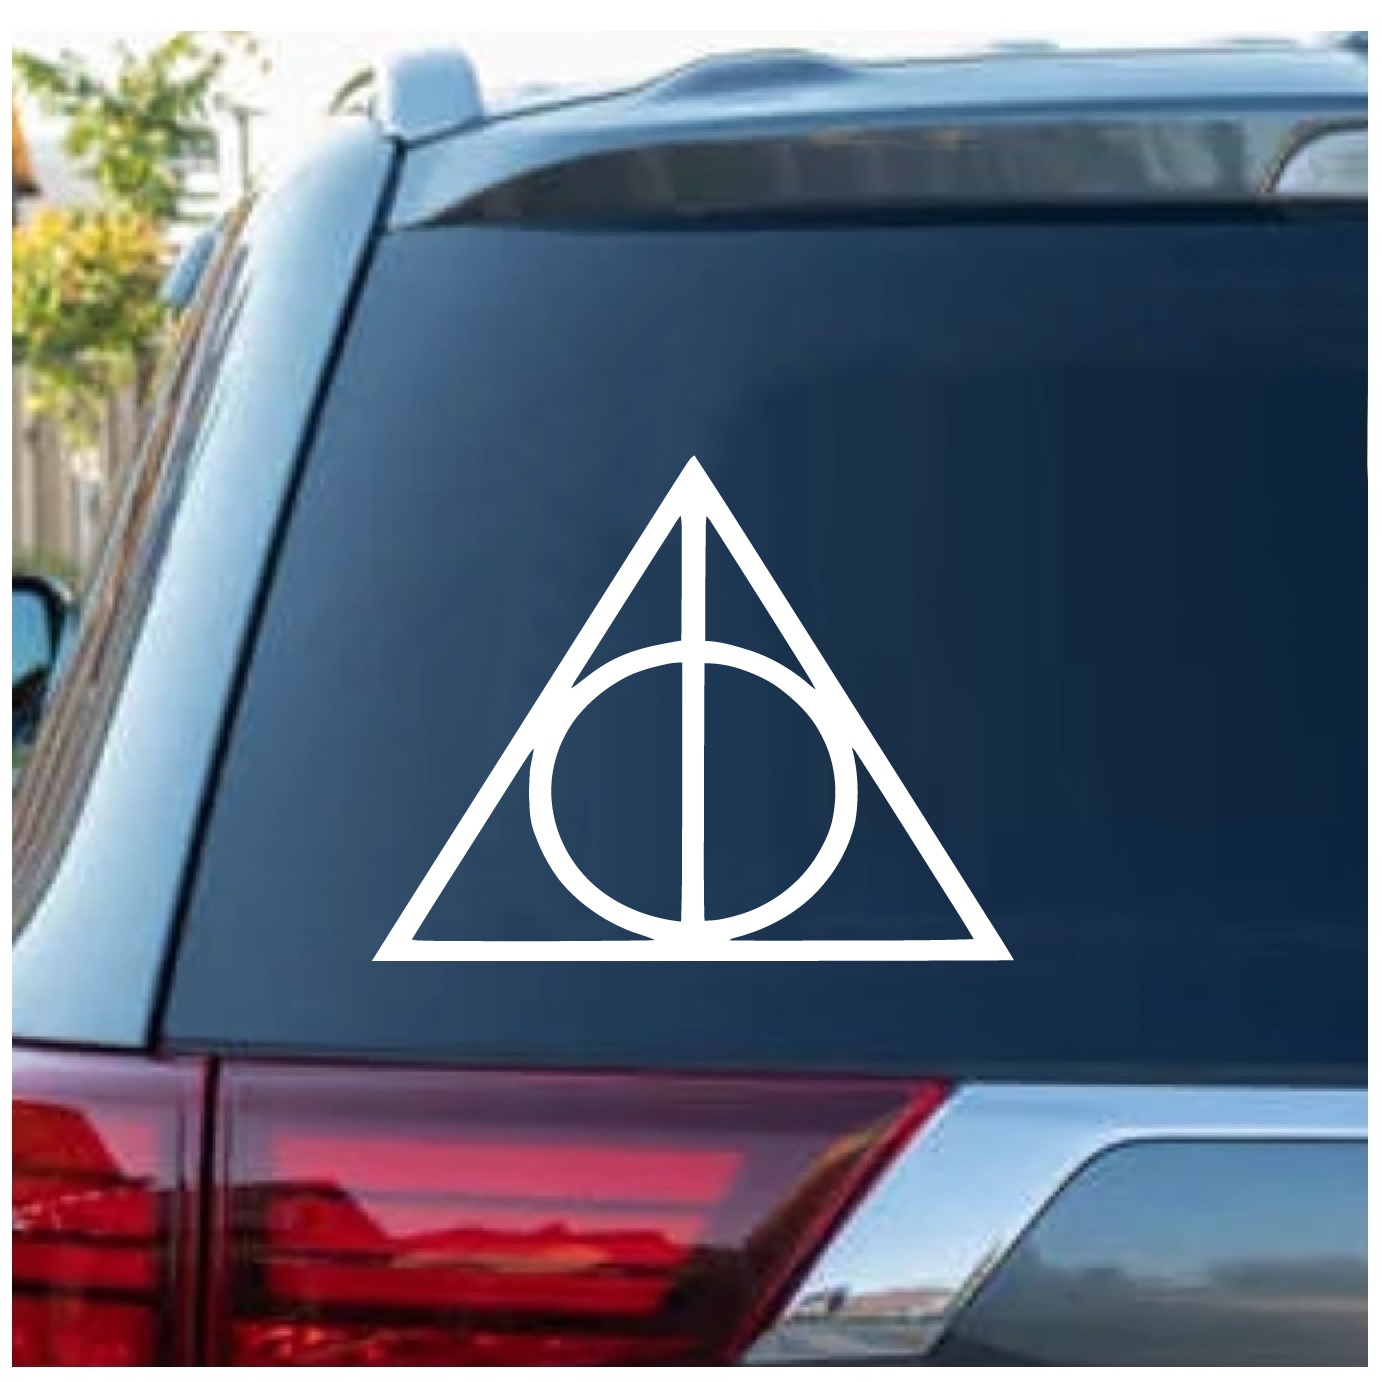 Harry Potter Deathly Hallows Window Decal Sticker, Custom Made In the USA